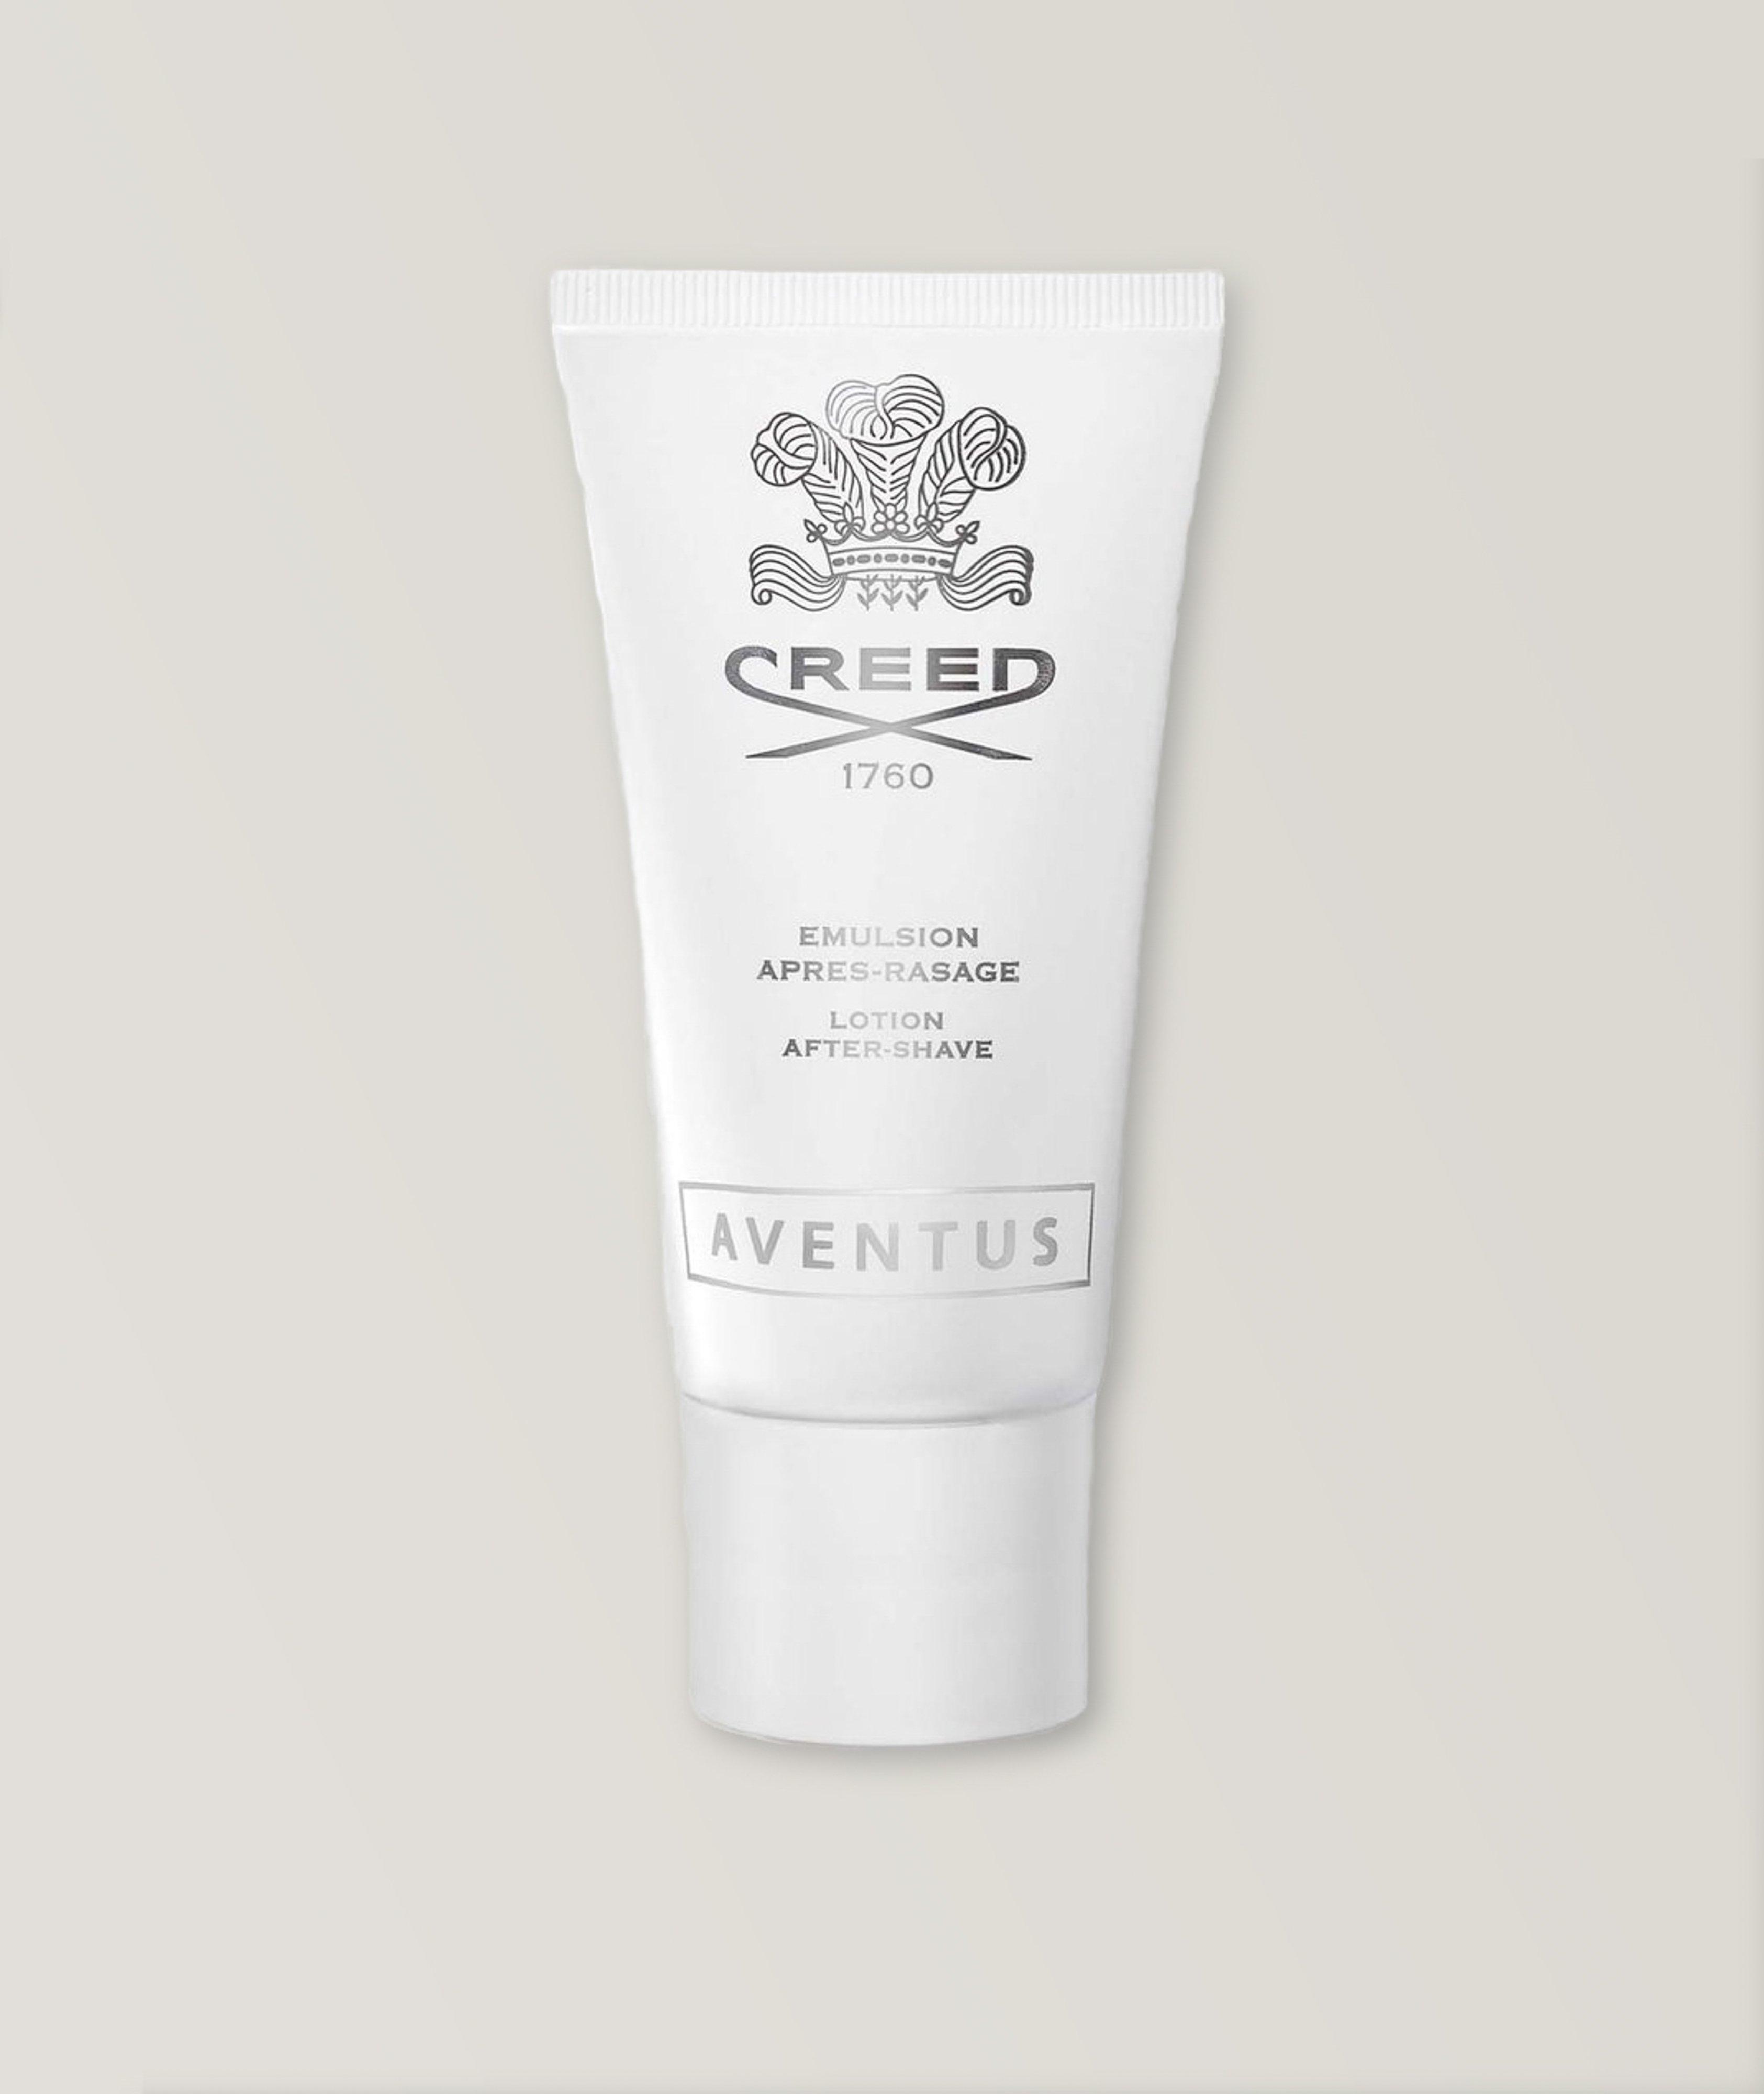 Aventus After Shave Balm image 0